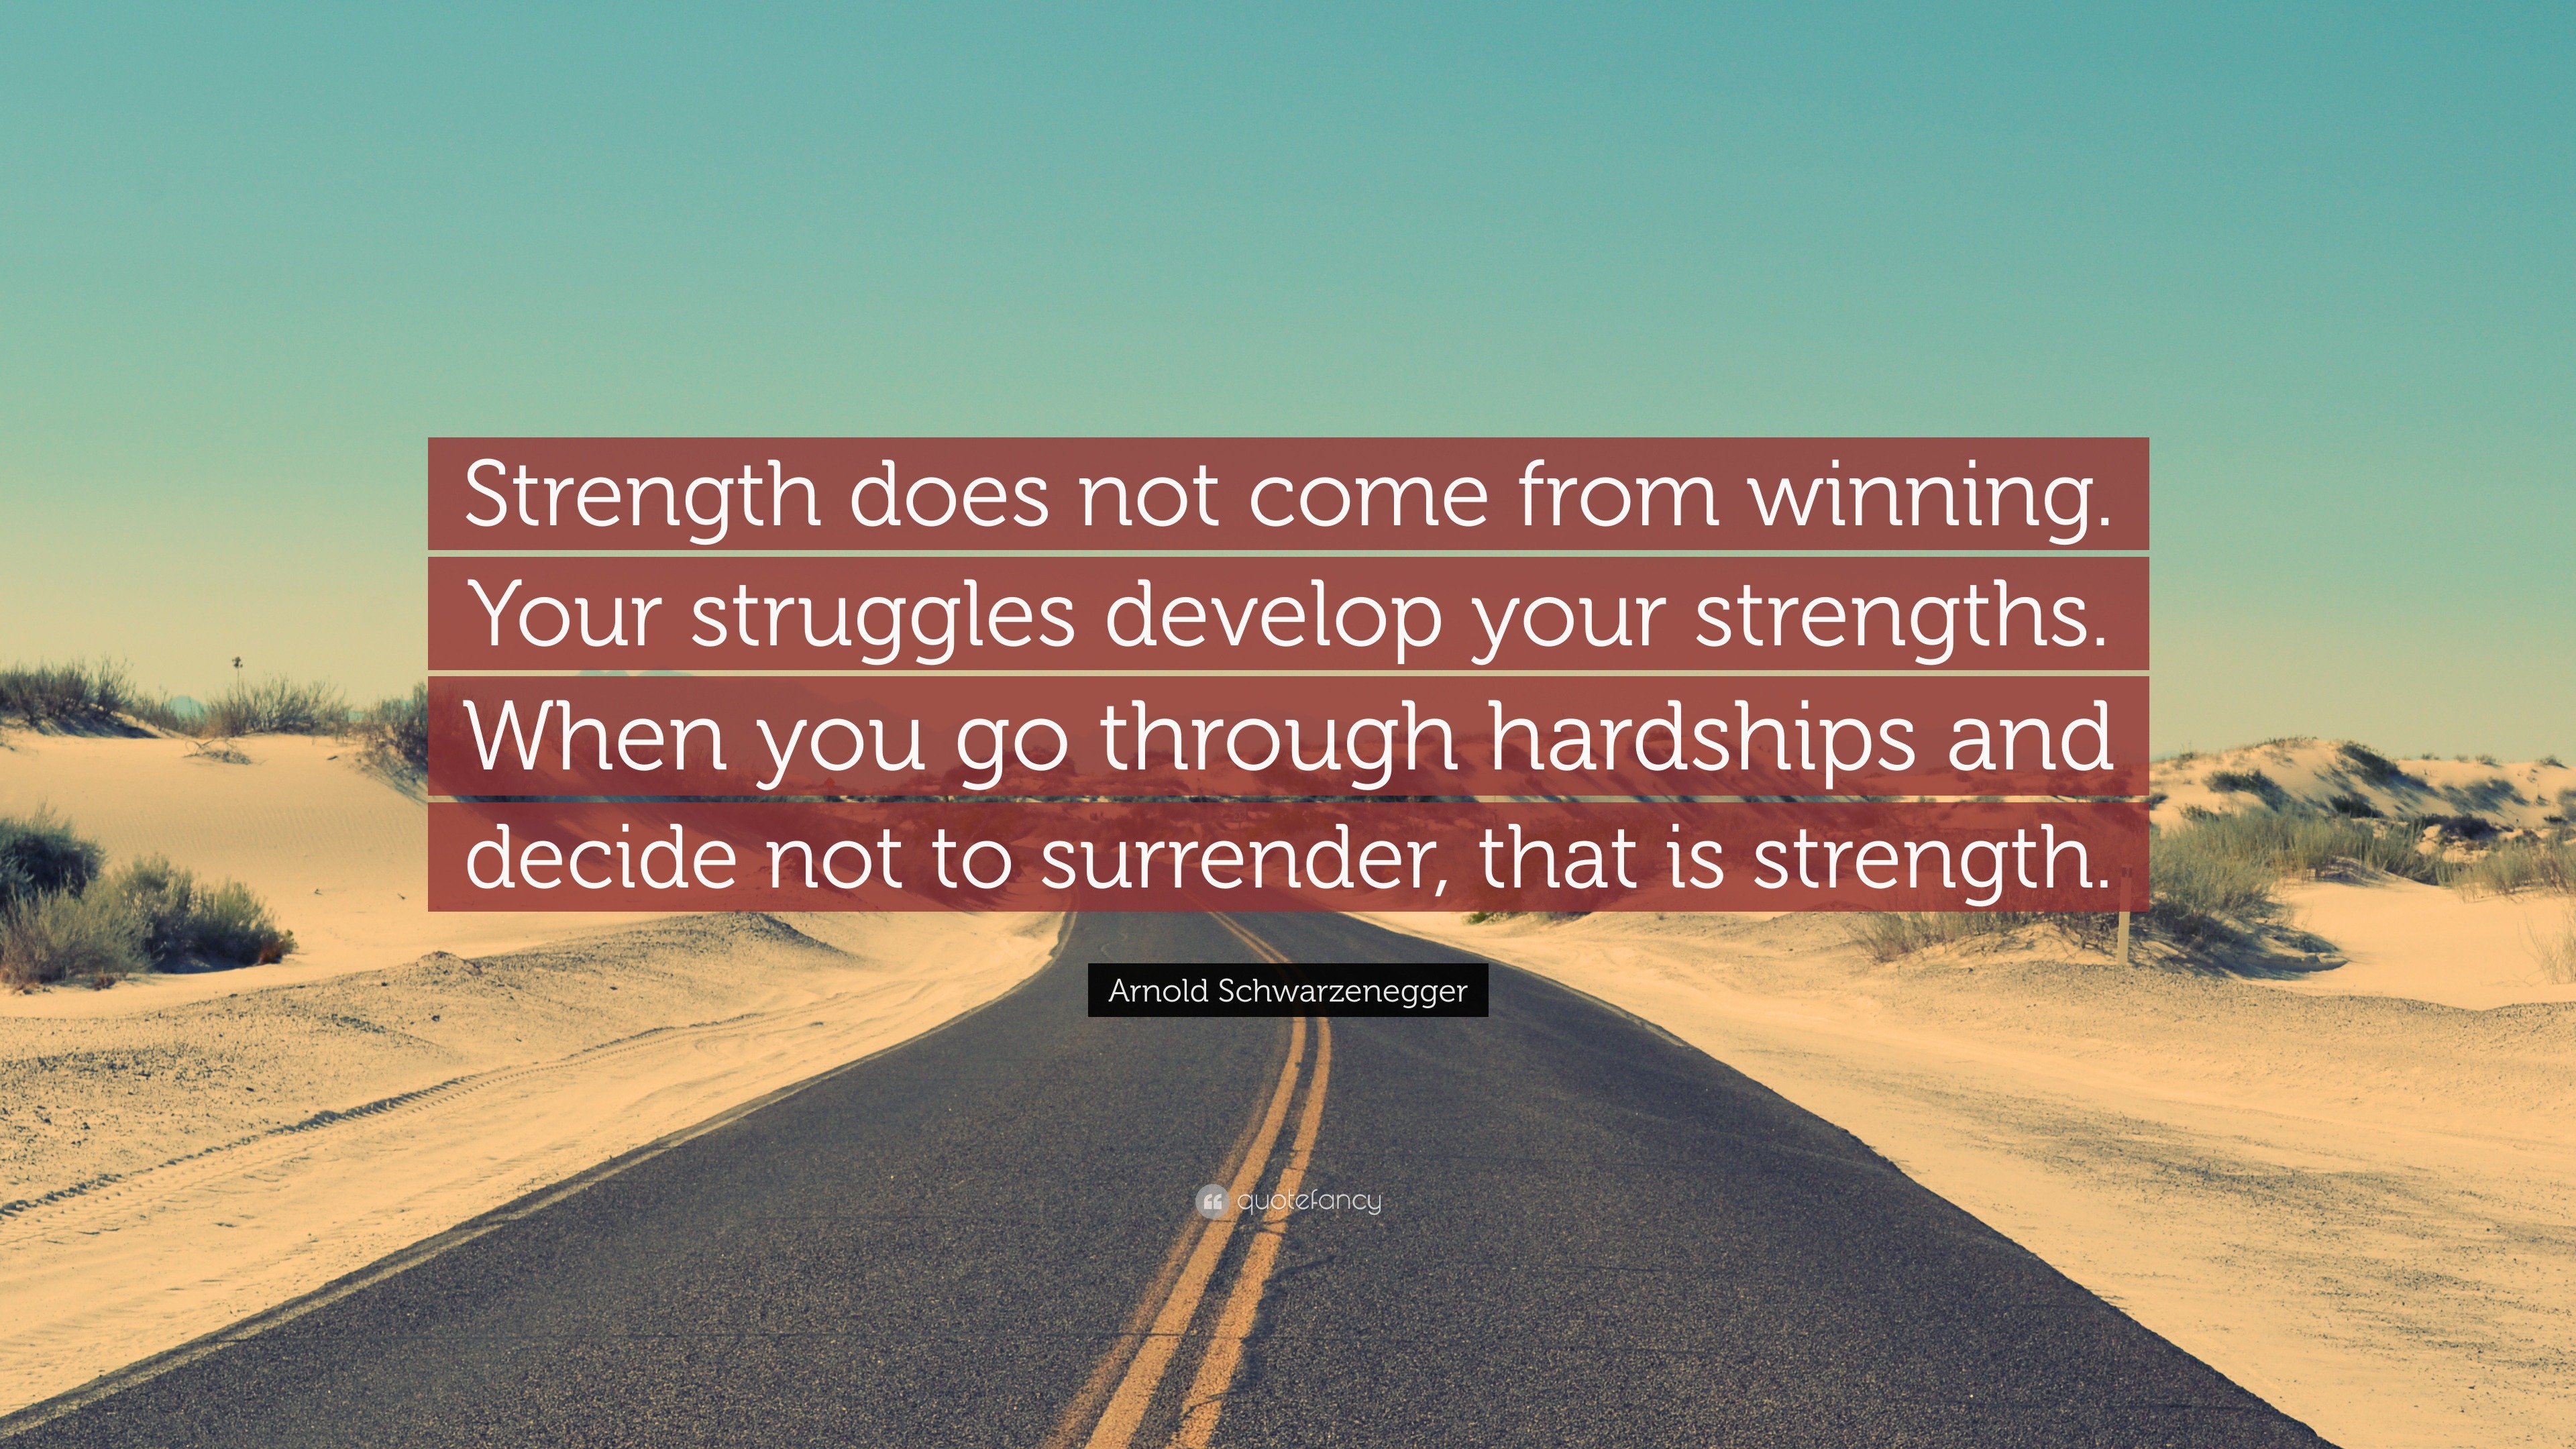 Arnold Schwarzenegger Quote: “Strength does not come from winning. Your